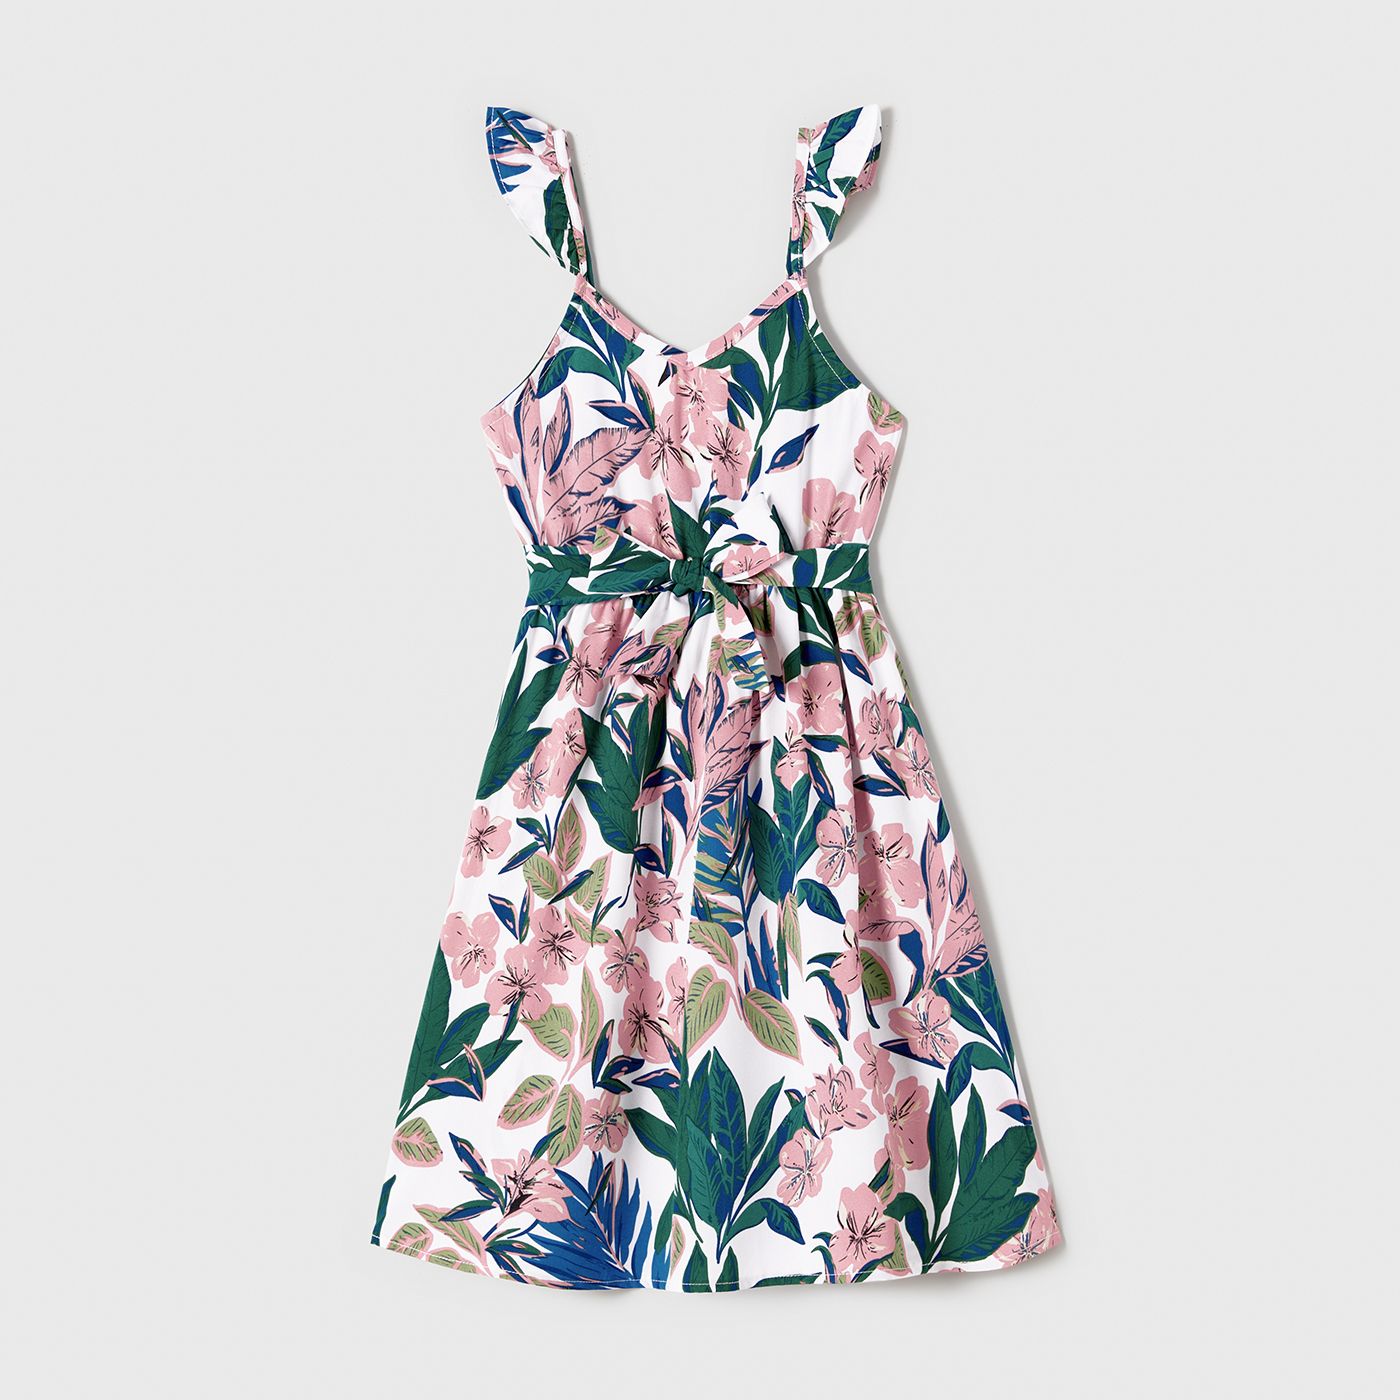 Family Matching Plant Floral Print Slip Dresses And Colorblock Short-sleeve T-shirts Sets